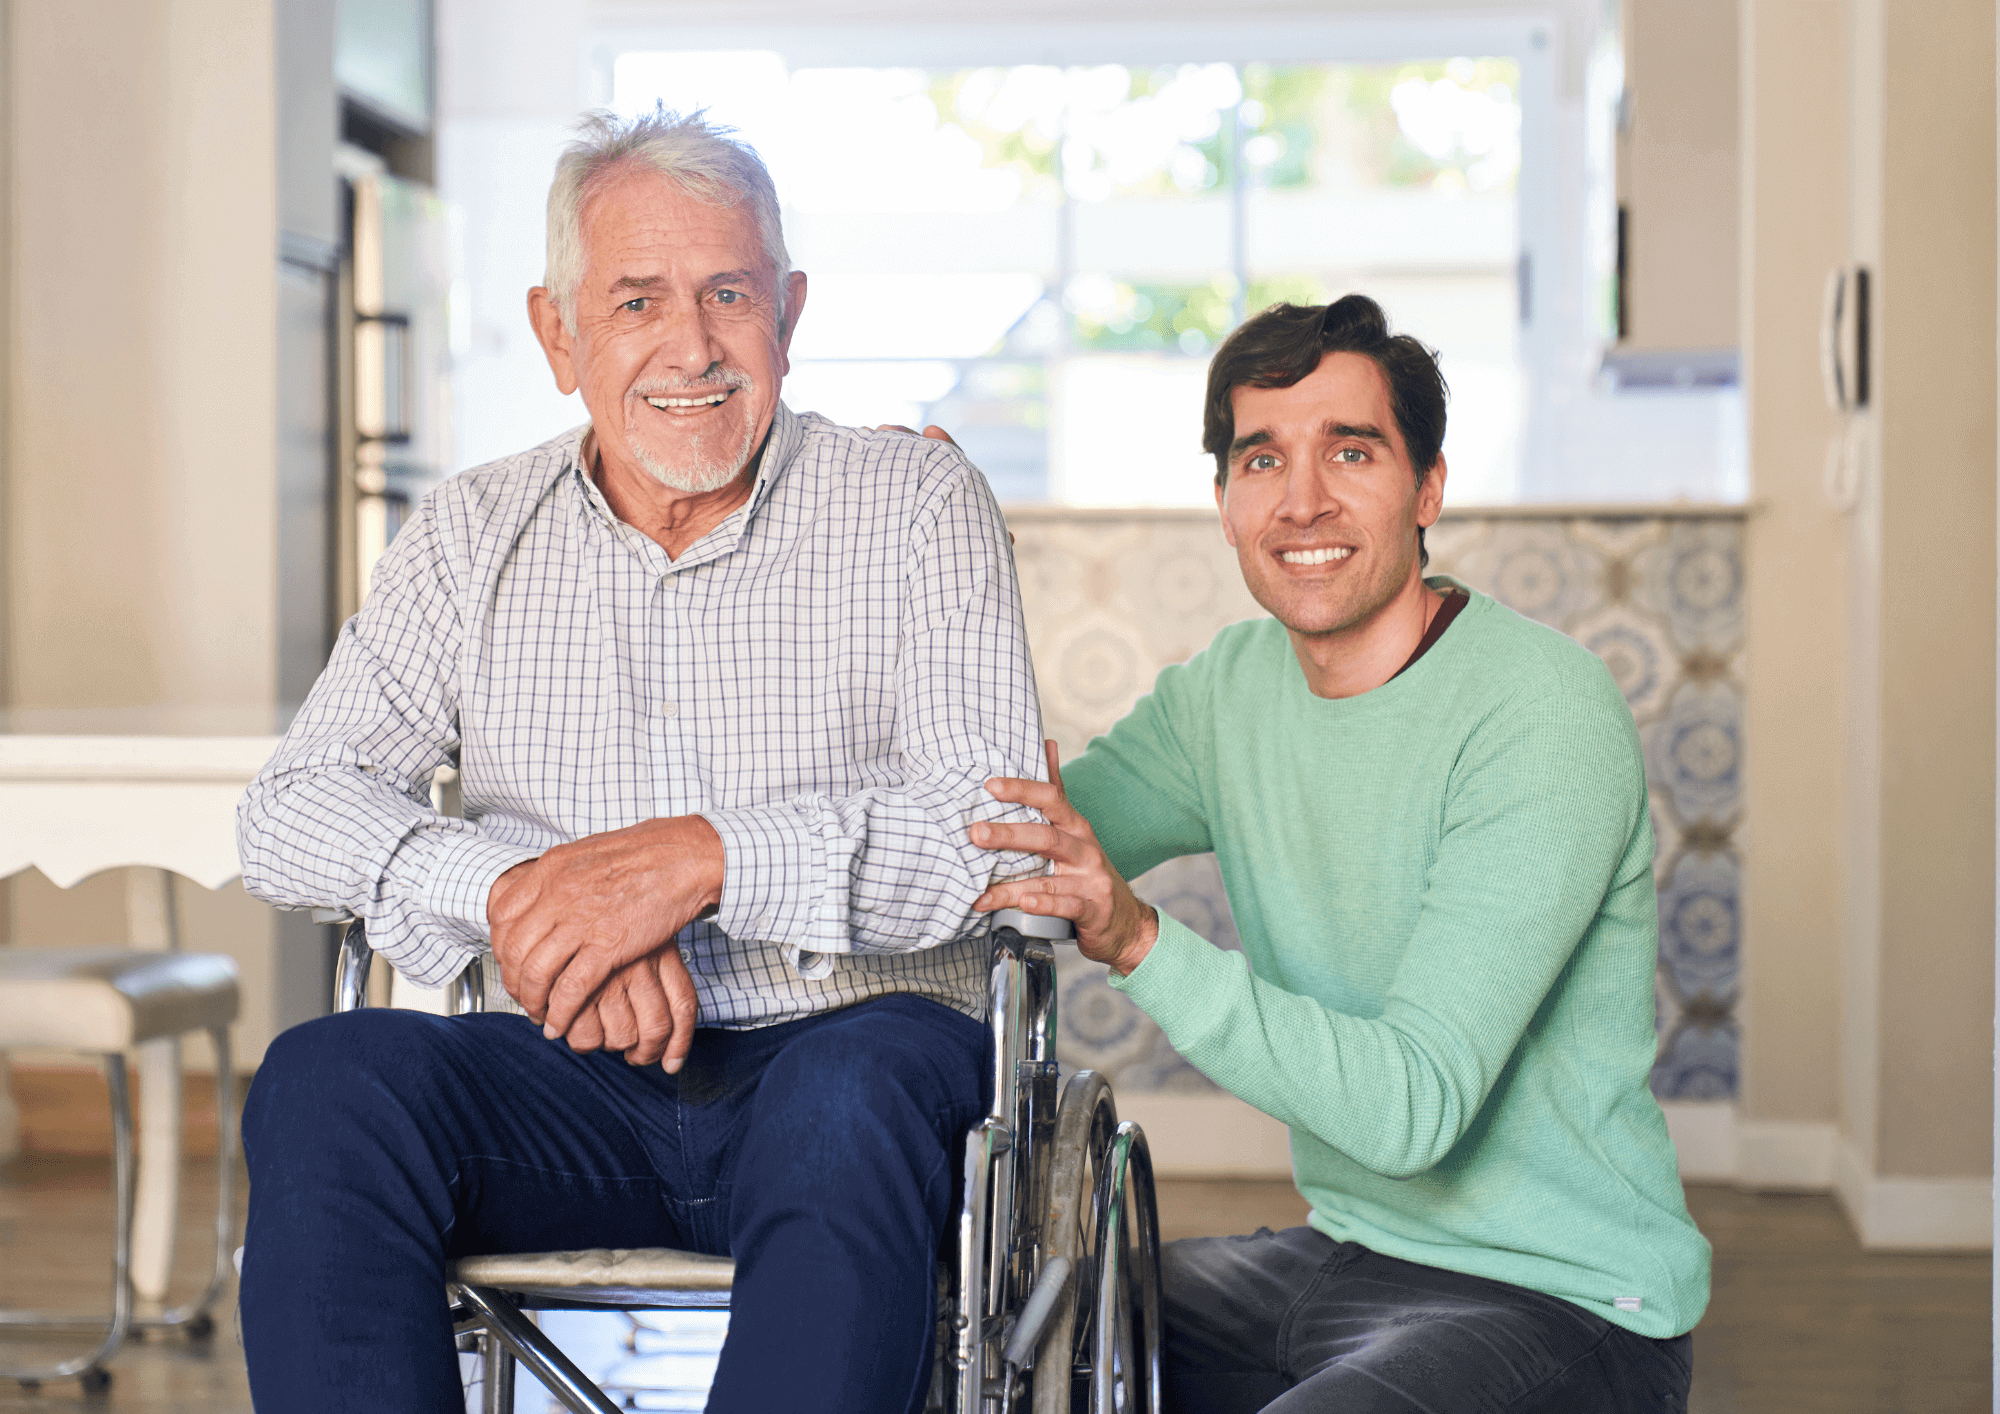 A younger man kneels by an older man in a wheelchair. They both smile at the camera.